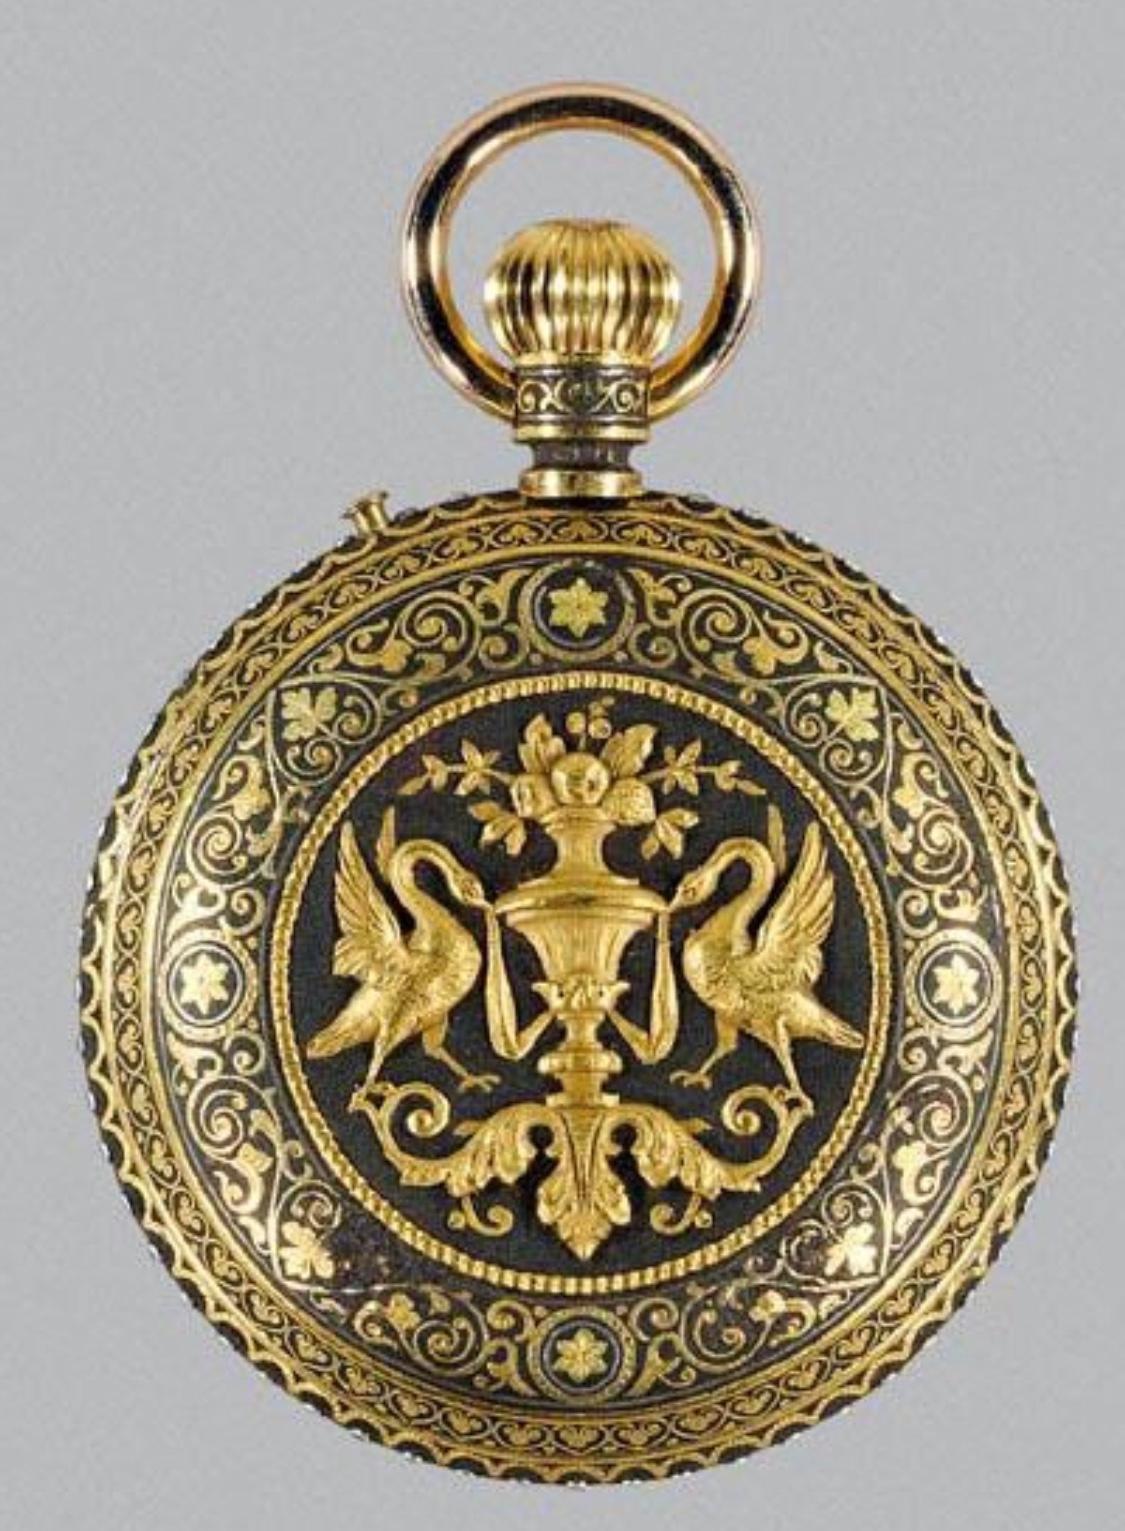 A rare Placido Zuloaga Spanish damascened gold and steel pocket watch,
circa 1885.

The interior signed in monogram PZ, the movement signed: Ch. Ed. Larvet, Fleurier Suisse, No. 15905

The case applied with two delicate chased gold swans